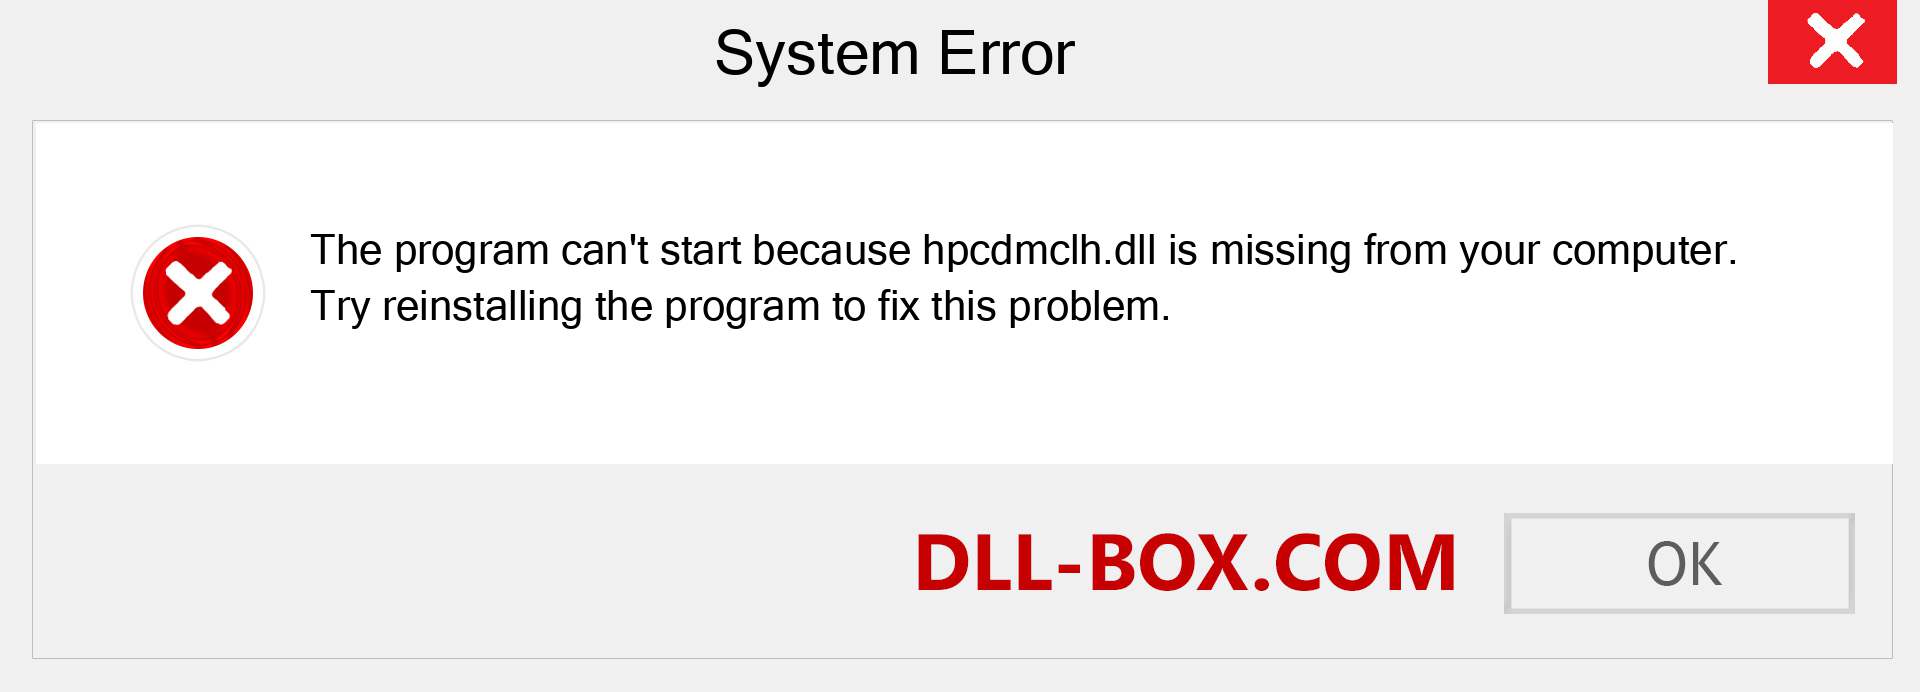  hpcdmclh.dll file is missing?. Download for Windows 7, 8, 10 - Fix  hpcdmclh dll Missing Error on Windows, photos, images